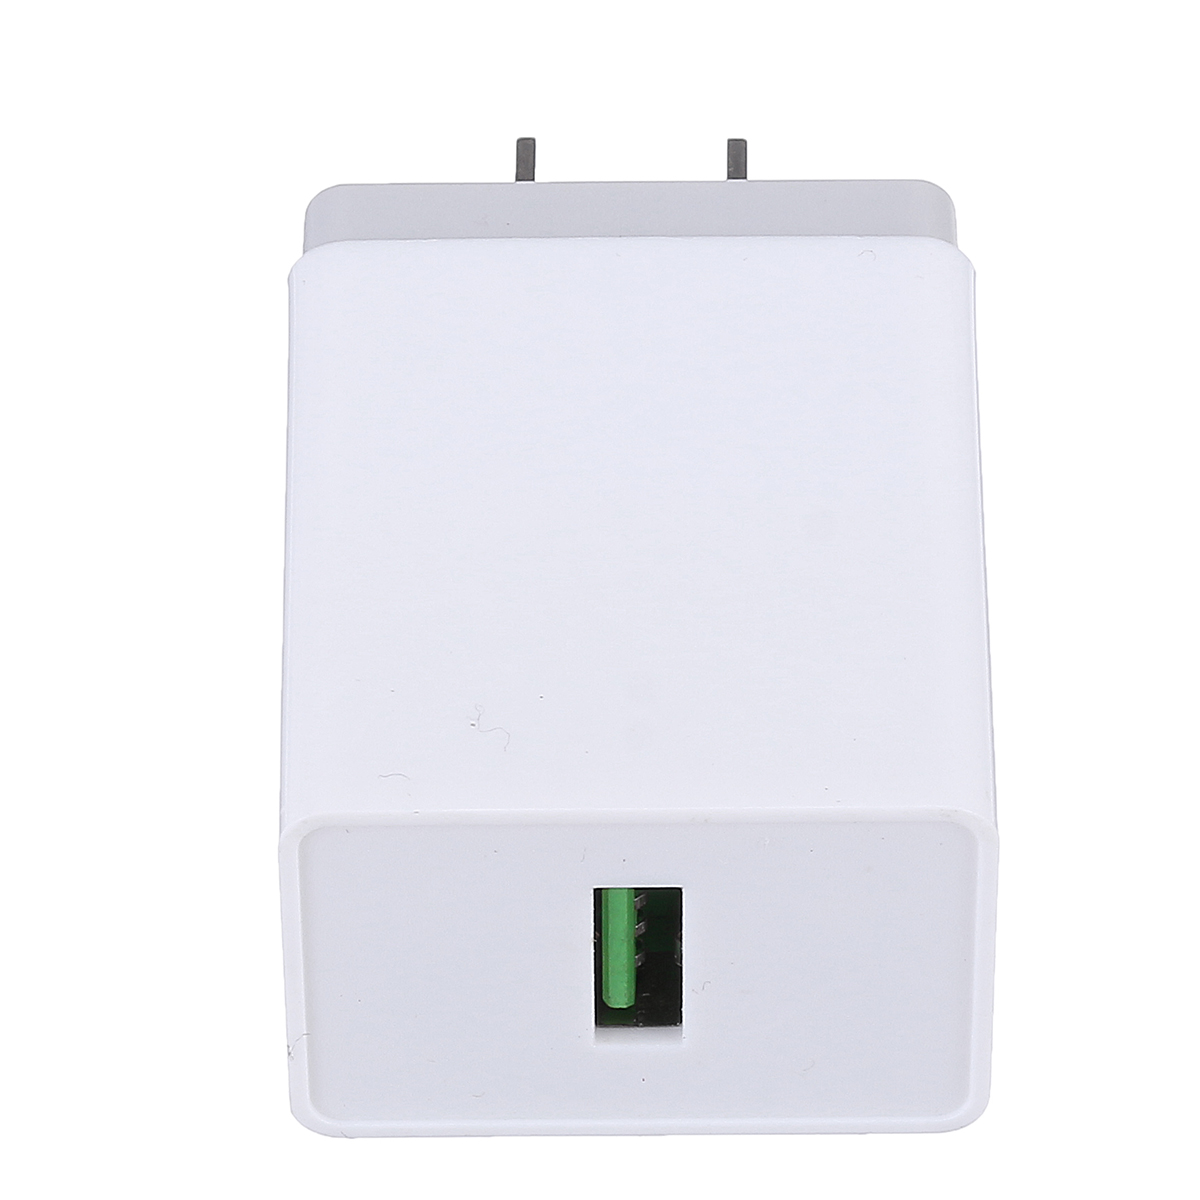 Universal-5V-21A-Lamp-Power-Travel-Charger-US-Standard-Plug-USB-Adapter-1620556-7